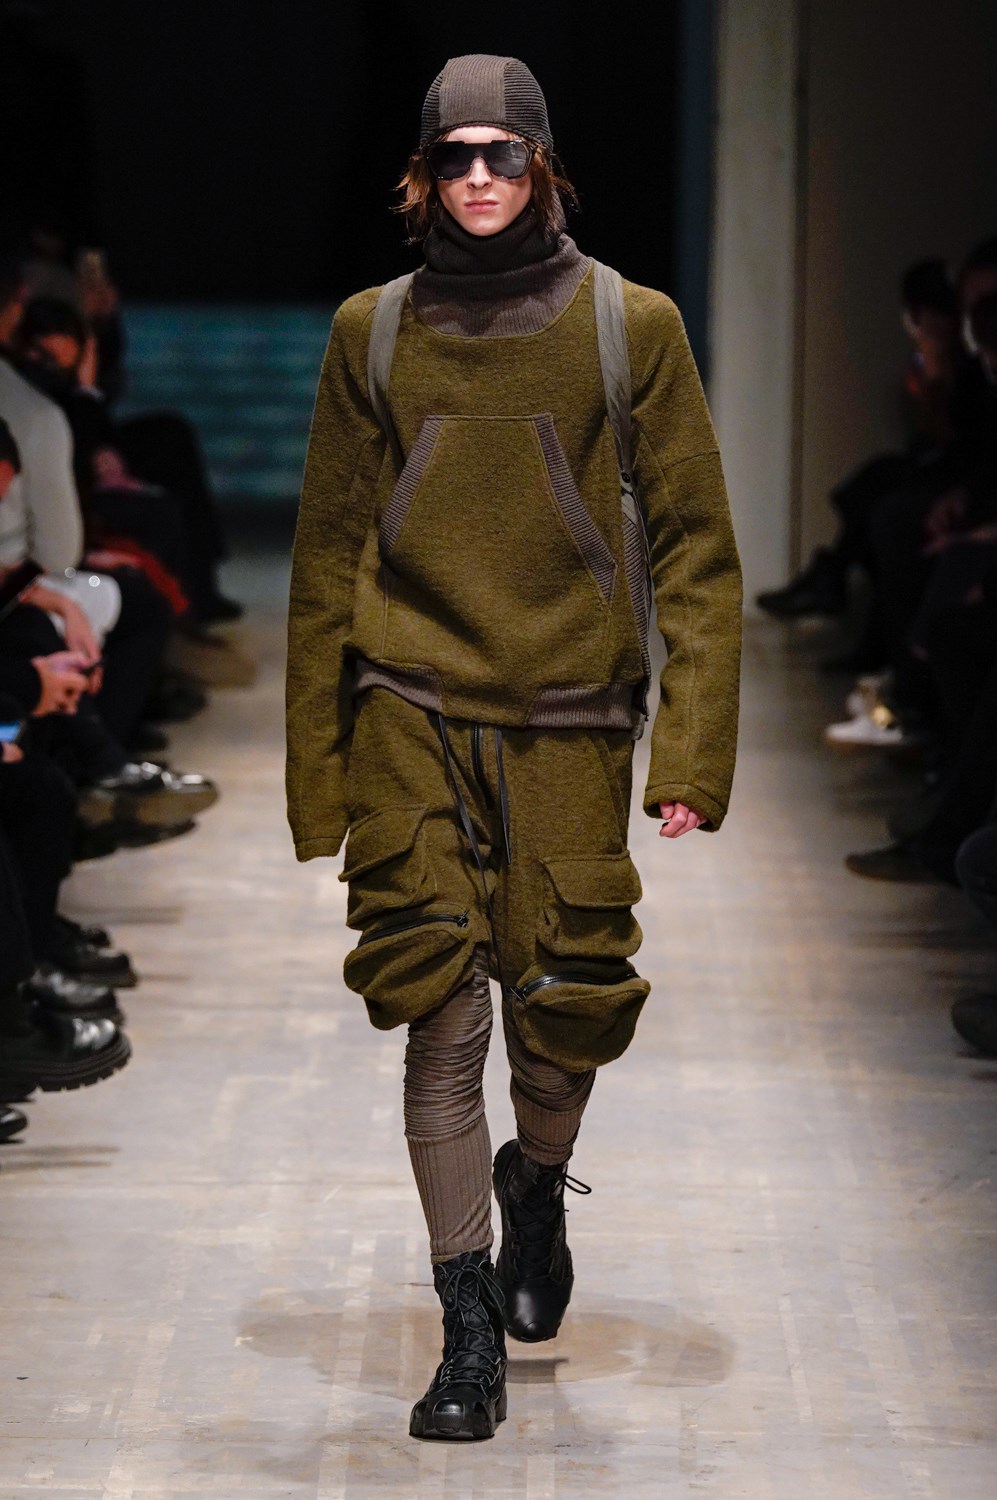 Gall Fall 2022 Men’s | The Impression